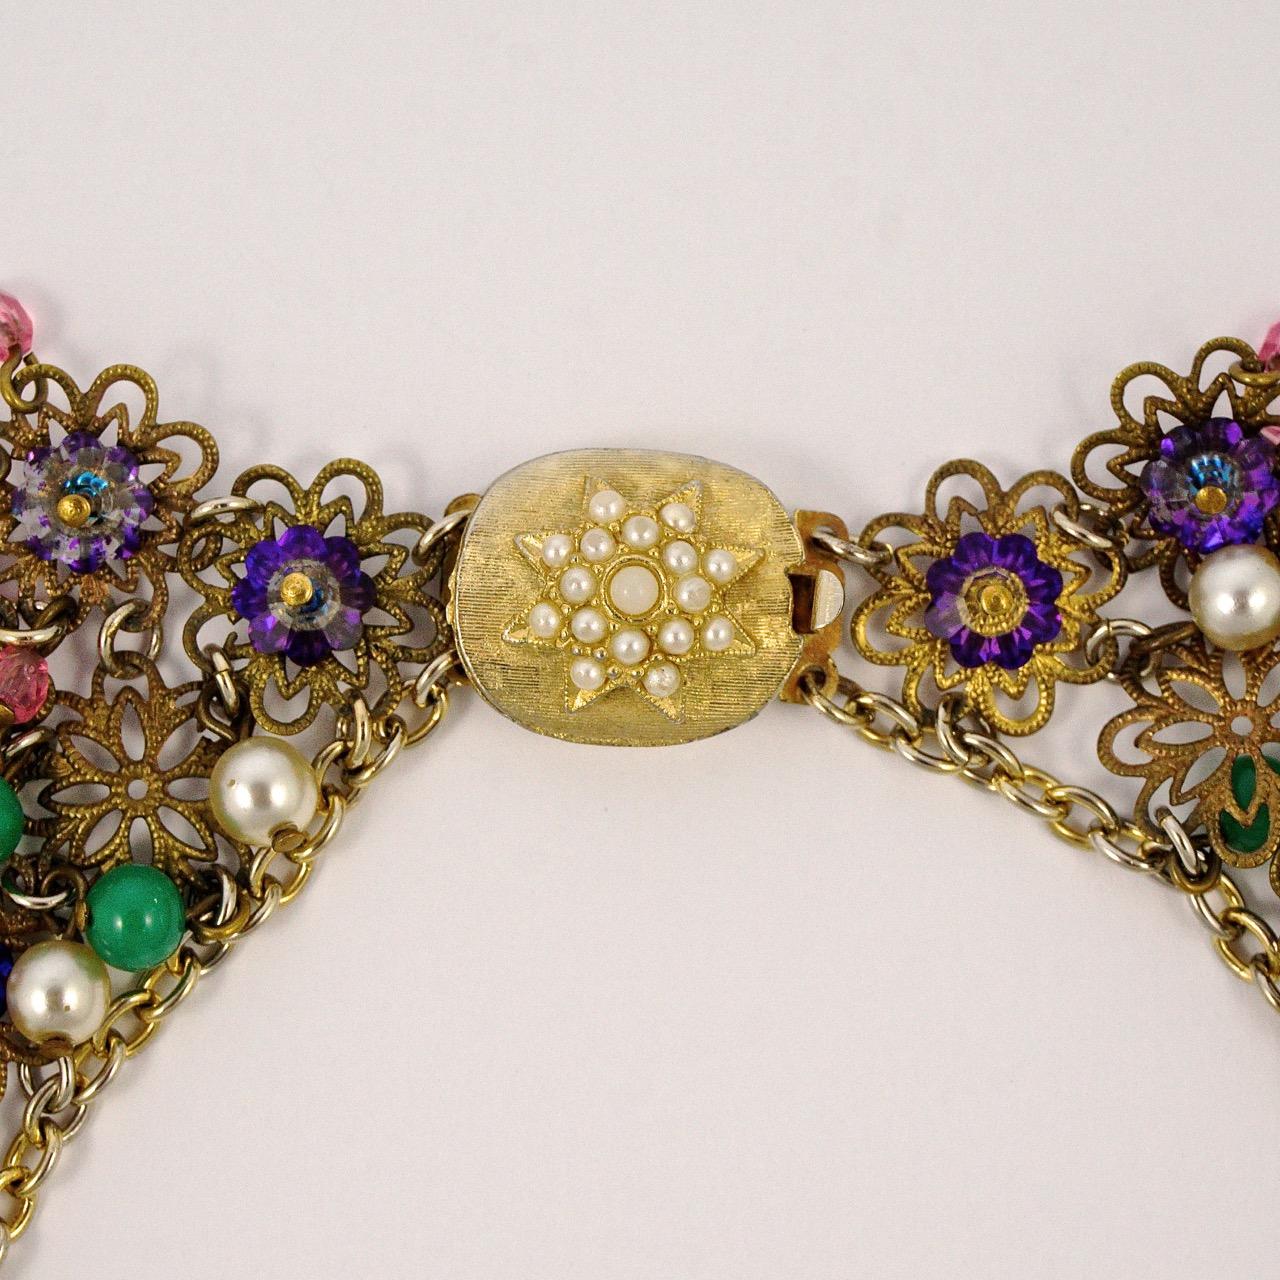 Pink Green Purple Glass Beads Faux Pearl Filigree Collar Necklace circa 1950s For Sale 1